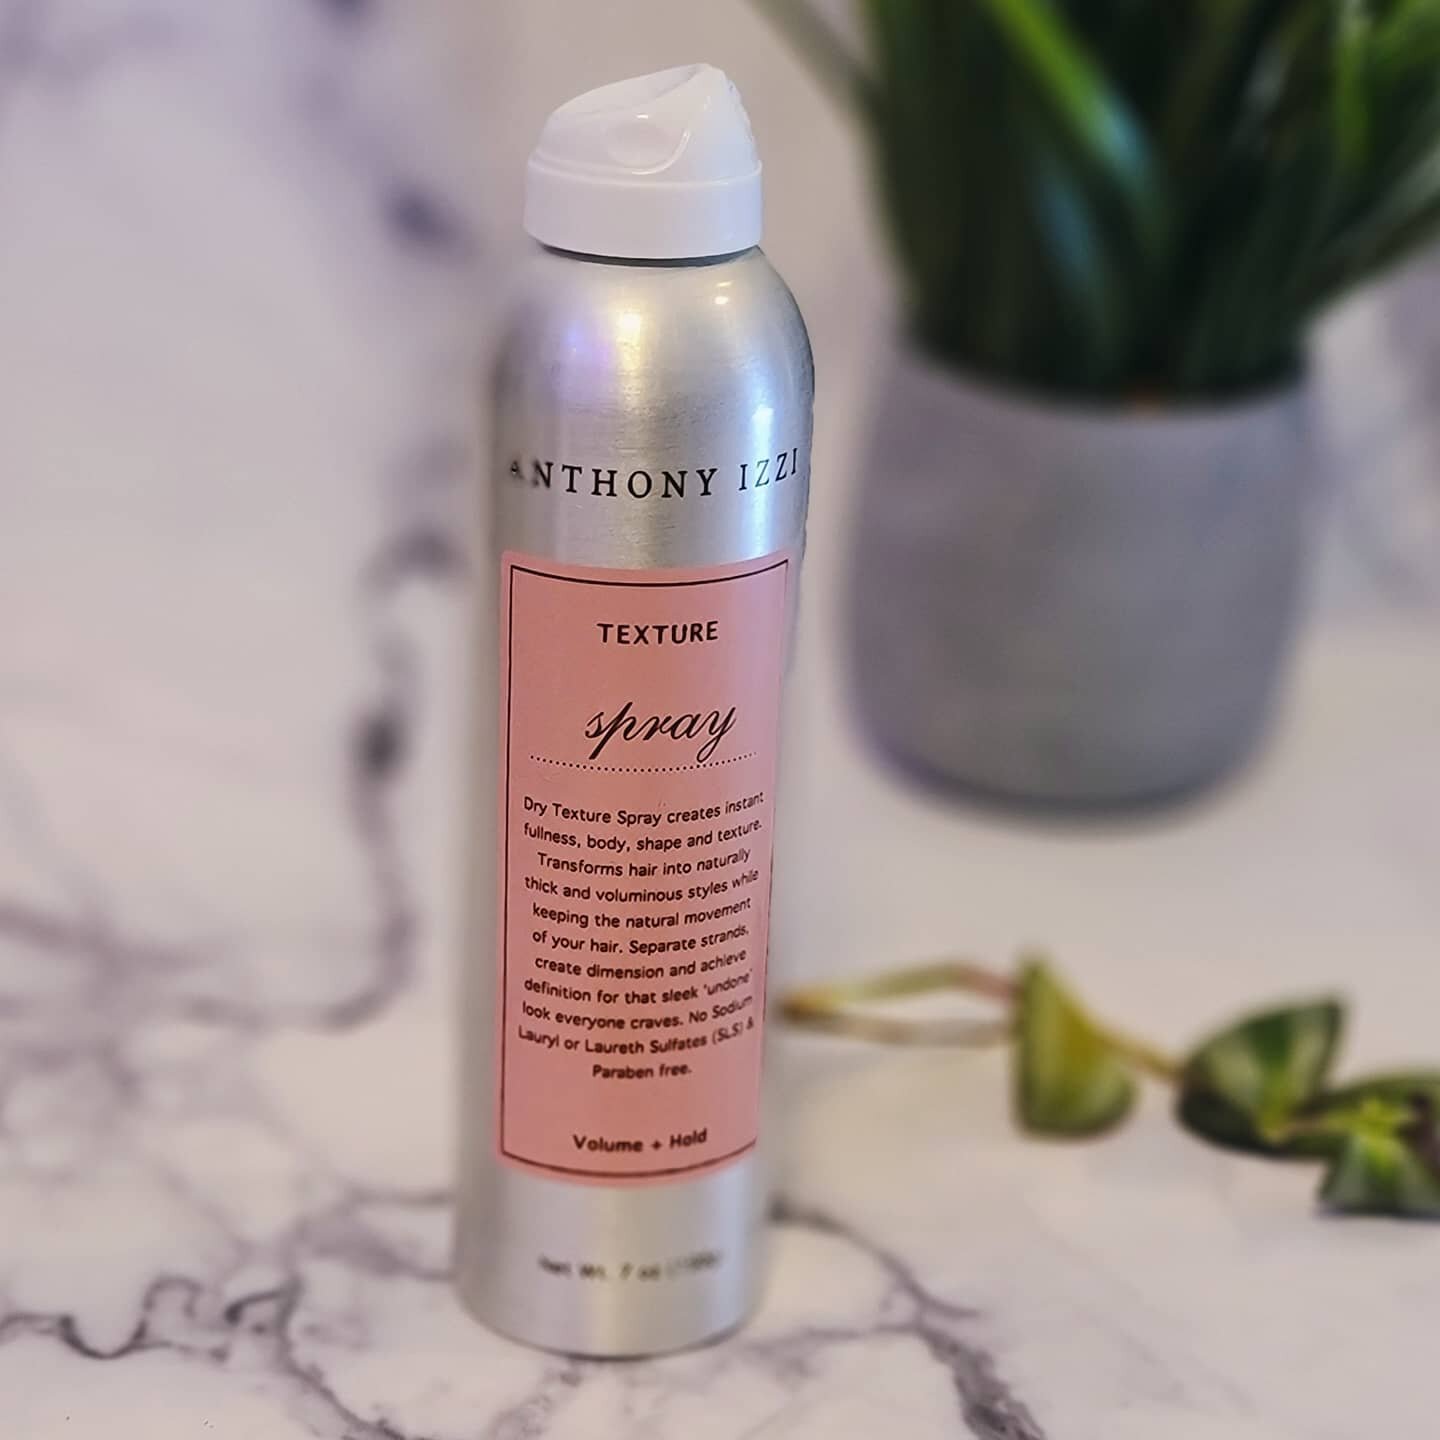 Volume + Hold 

Dry Texture Spray creates instant
fullness, body, shape and texture.

Transforms hair into naturally 
thick and voluminous and styles while
keeping the natural movement
of your hair. 

Separate strands, create dimension and achieve de